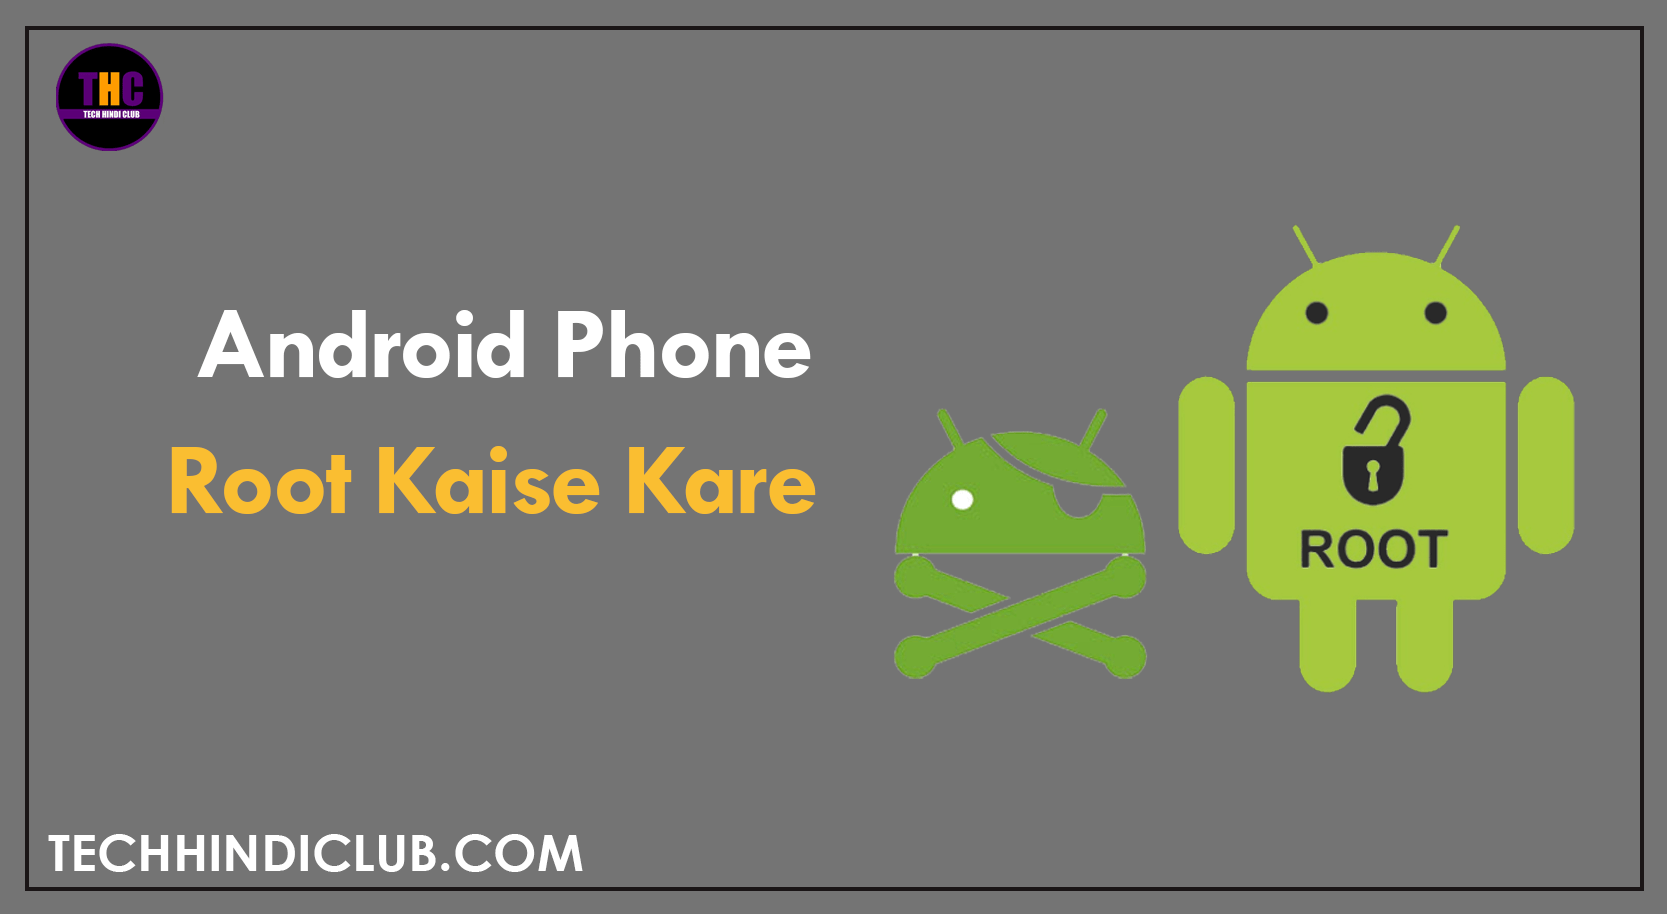 Android Phone Root Kaise Kare